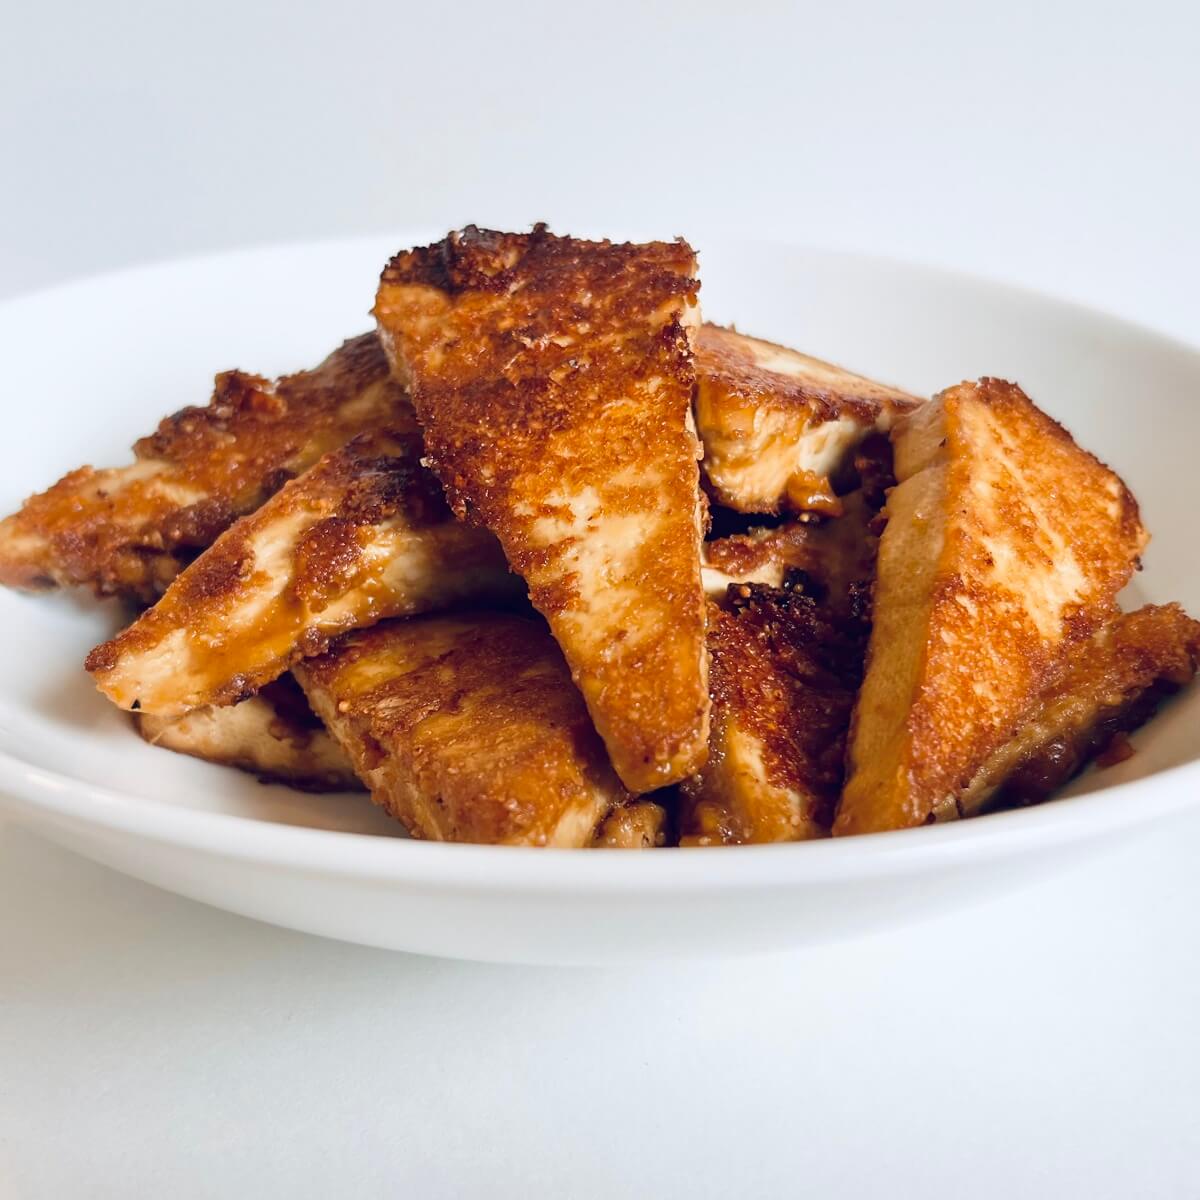 Triangular cut cooked, marinated tofu pieces in a bowl.